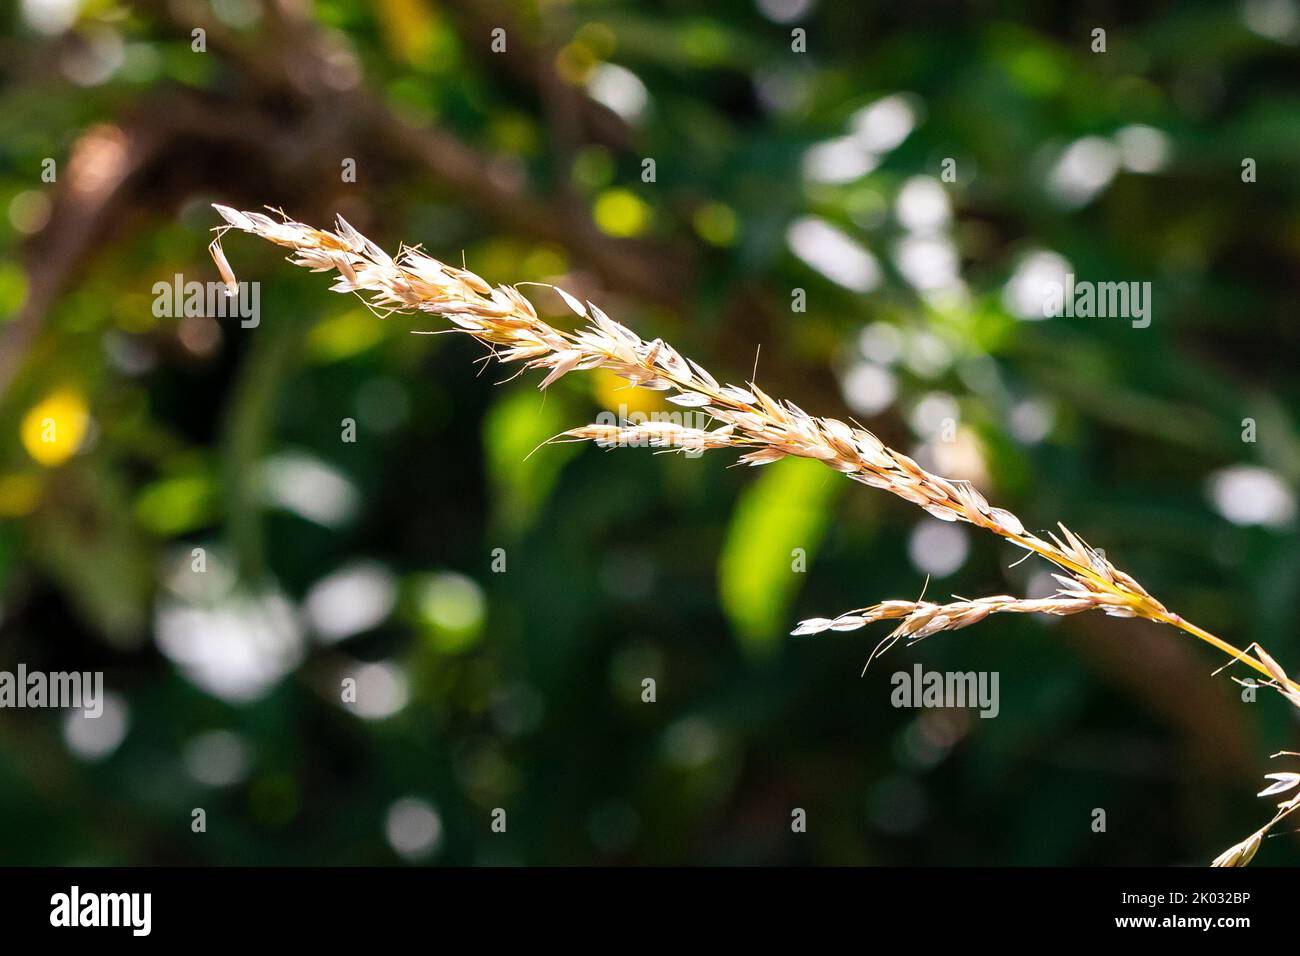 A closeup of Indiangrass (Sorghastrum nutans) under sunlight on blurred background Stock Photo